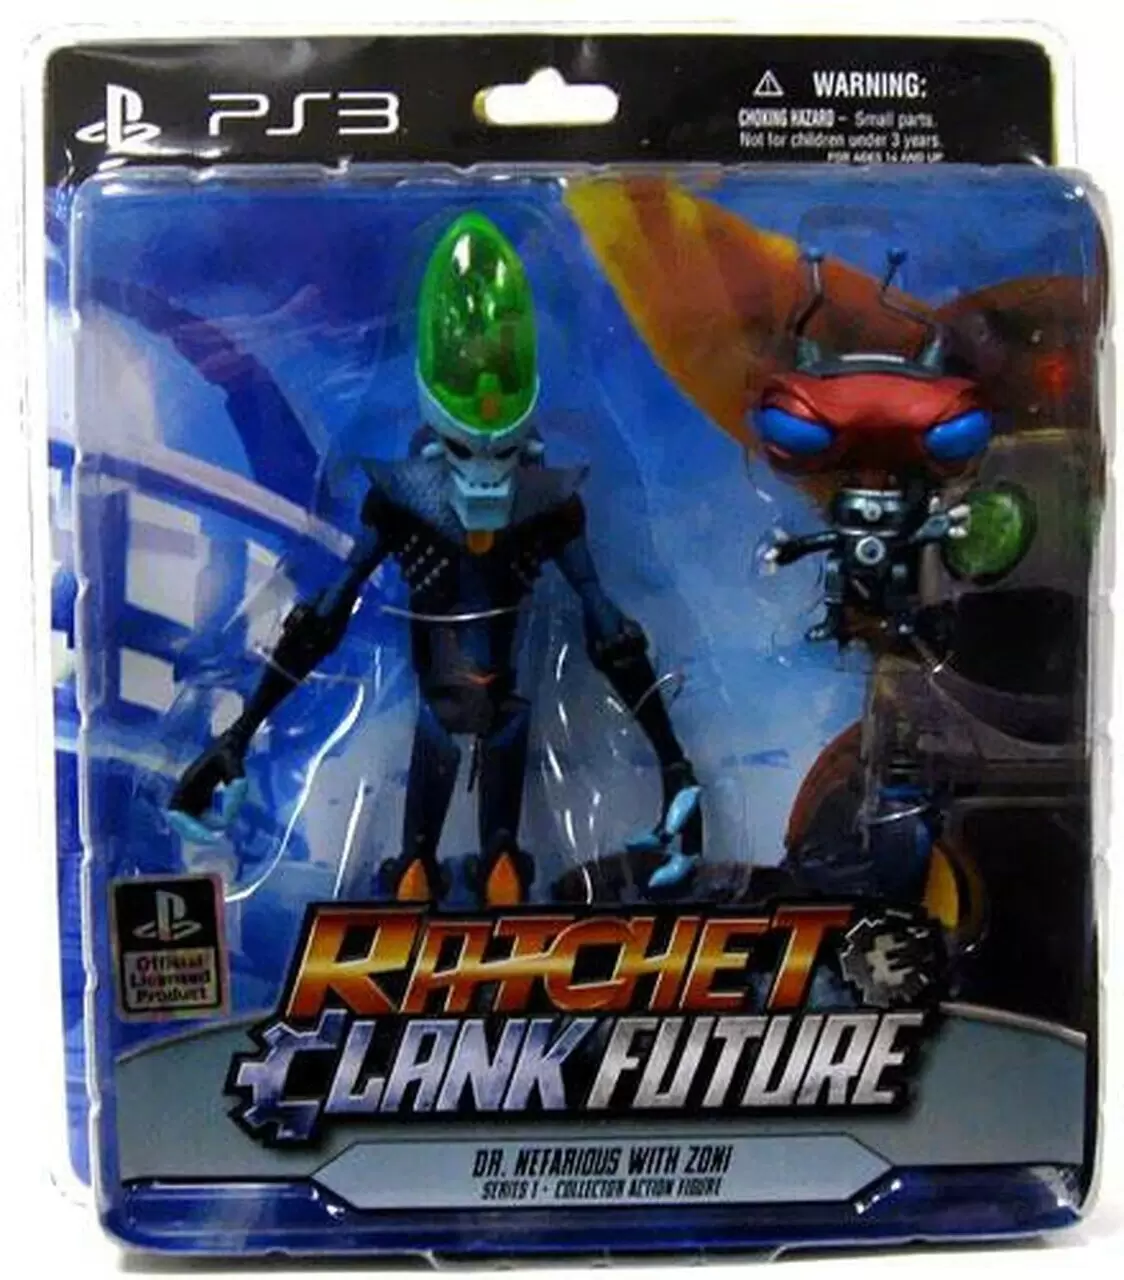 Ratchet and Clank Future - Dr. Nefarious & Zoni